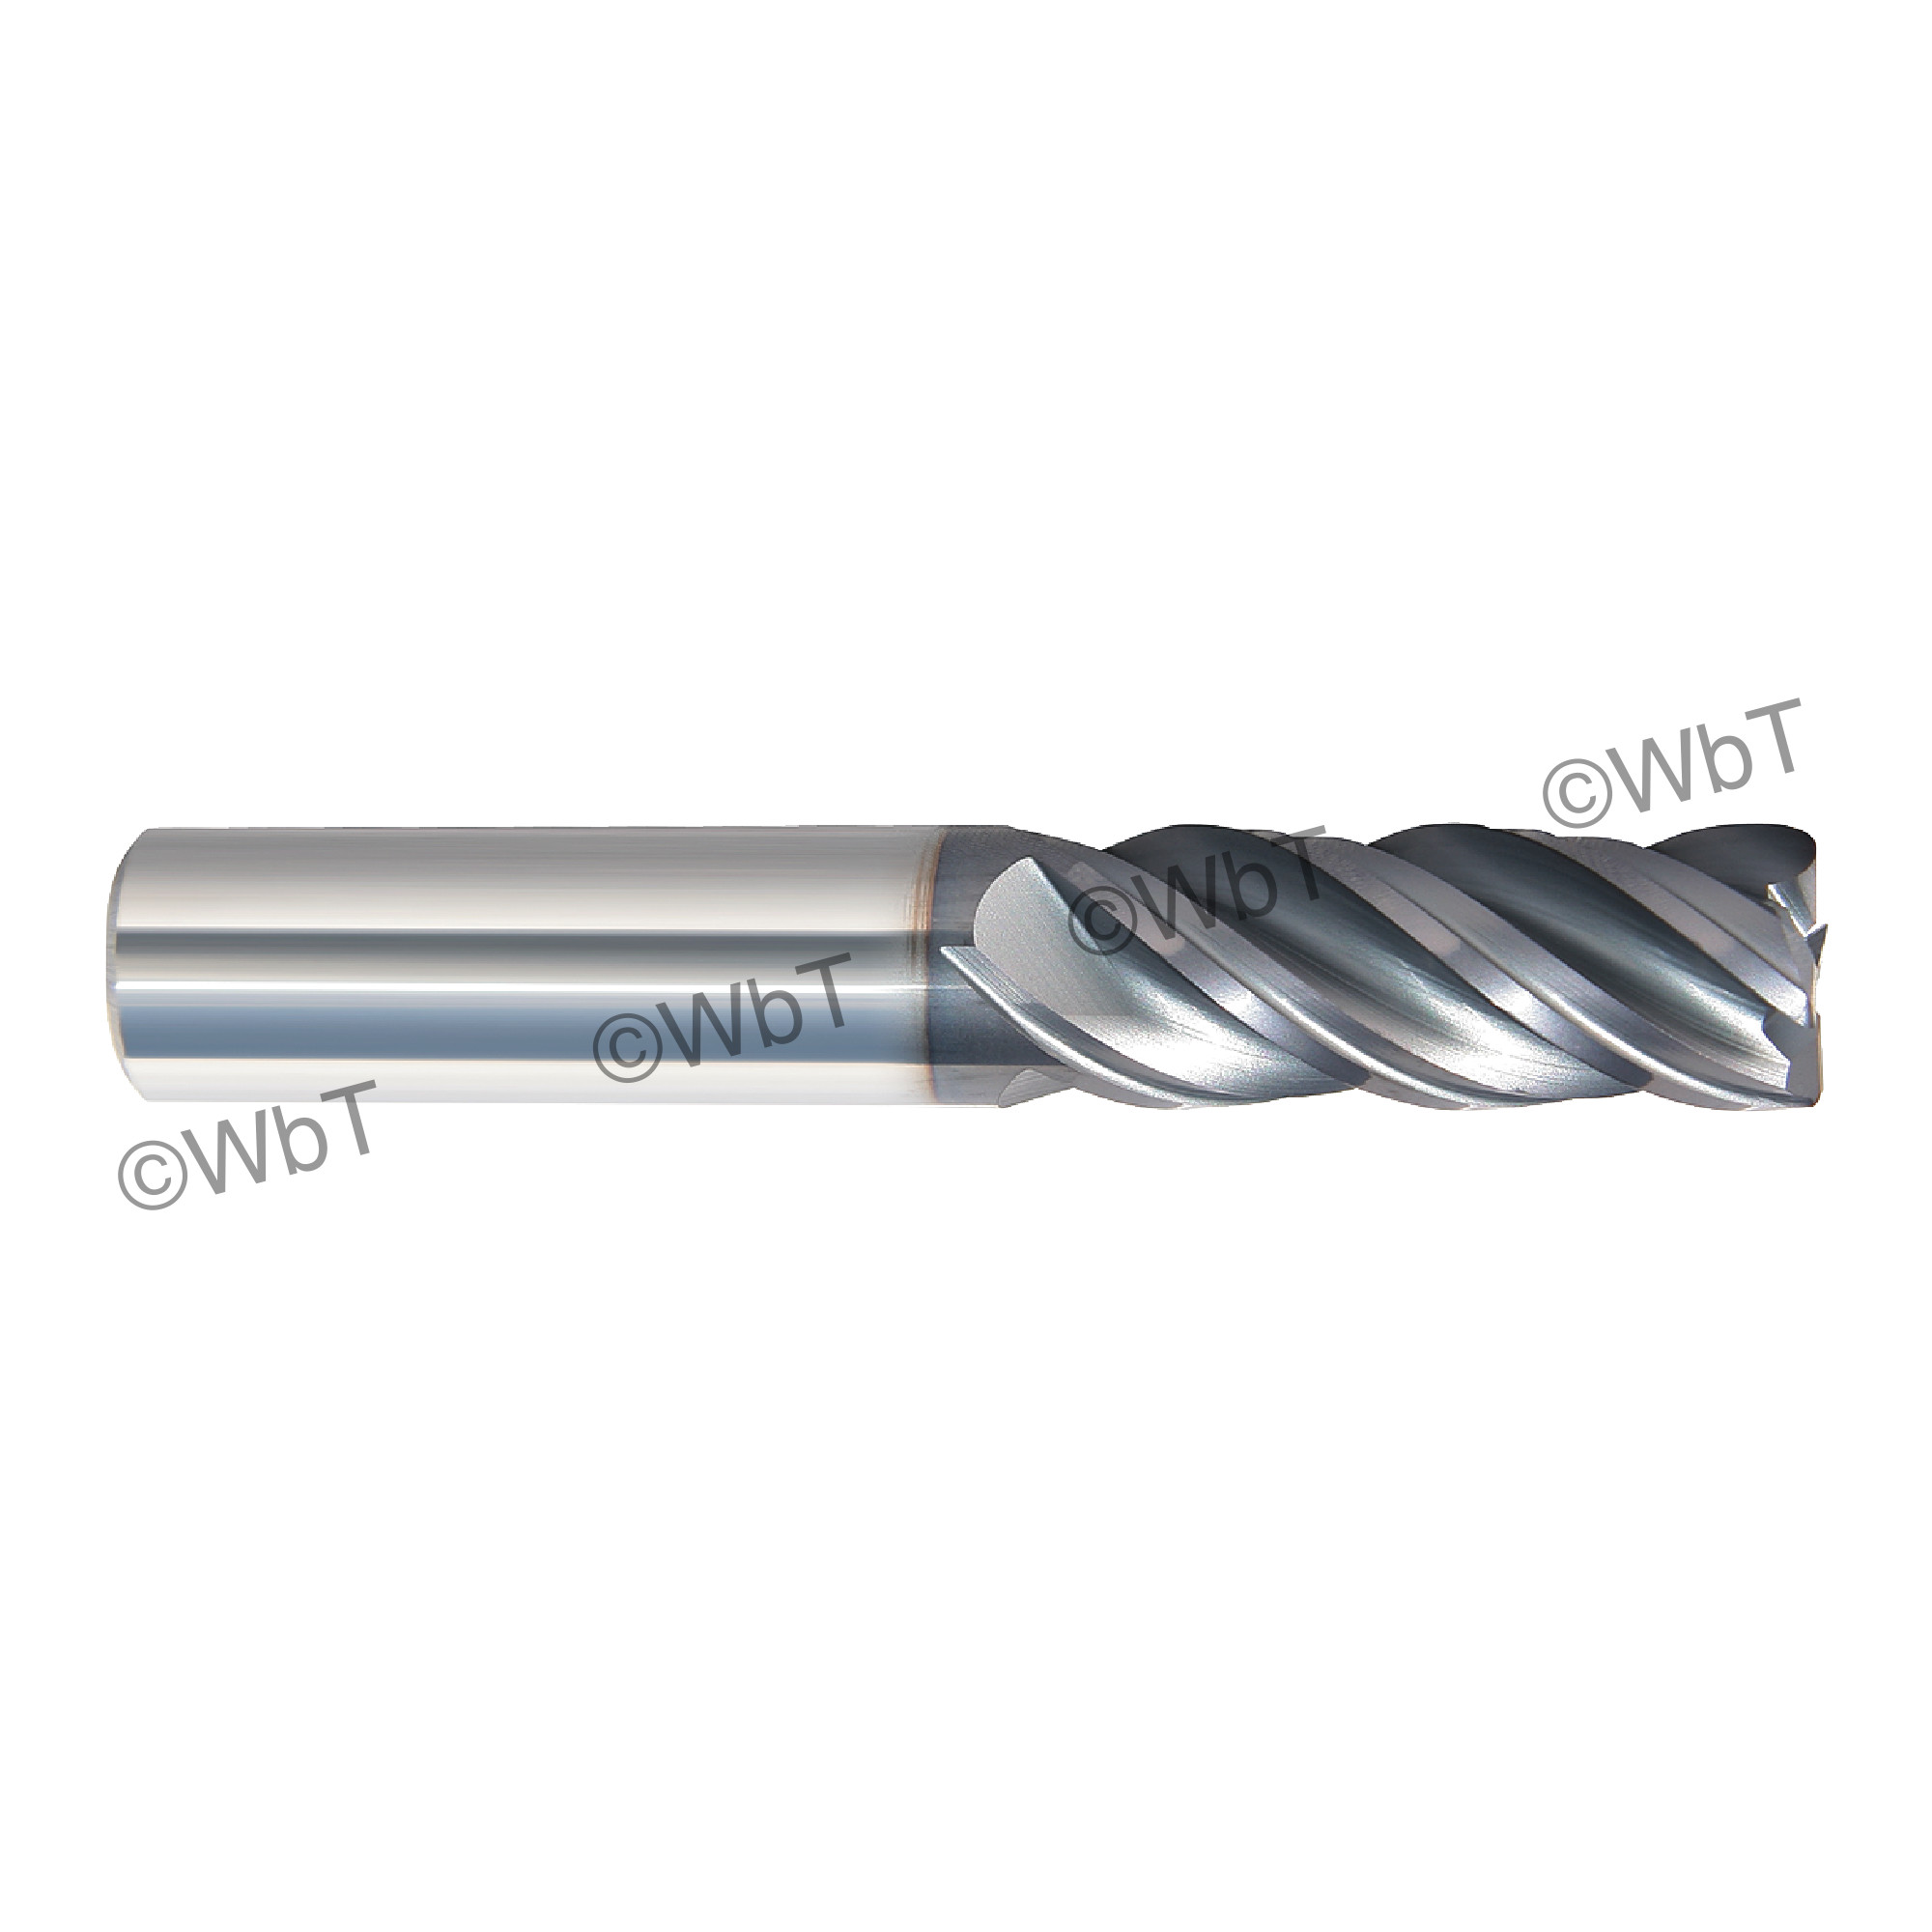 Rushmore USA 5/8" x 1-1/4" Flute Solid Carbide Variable Helix Unequal Index AlTiN Coated Corner Radius 4 Flute Roughing 